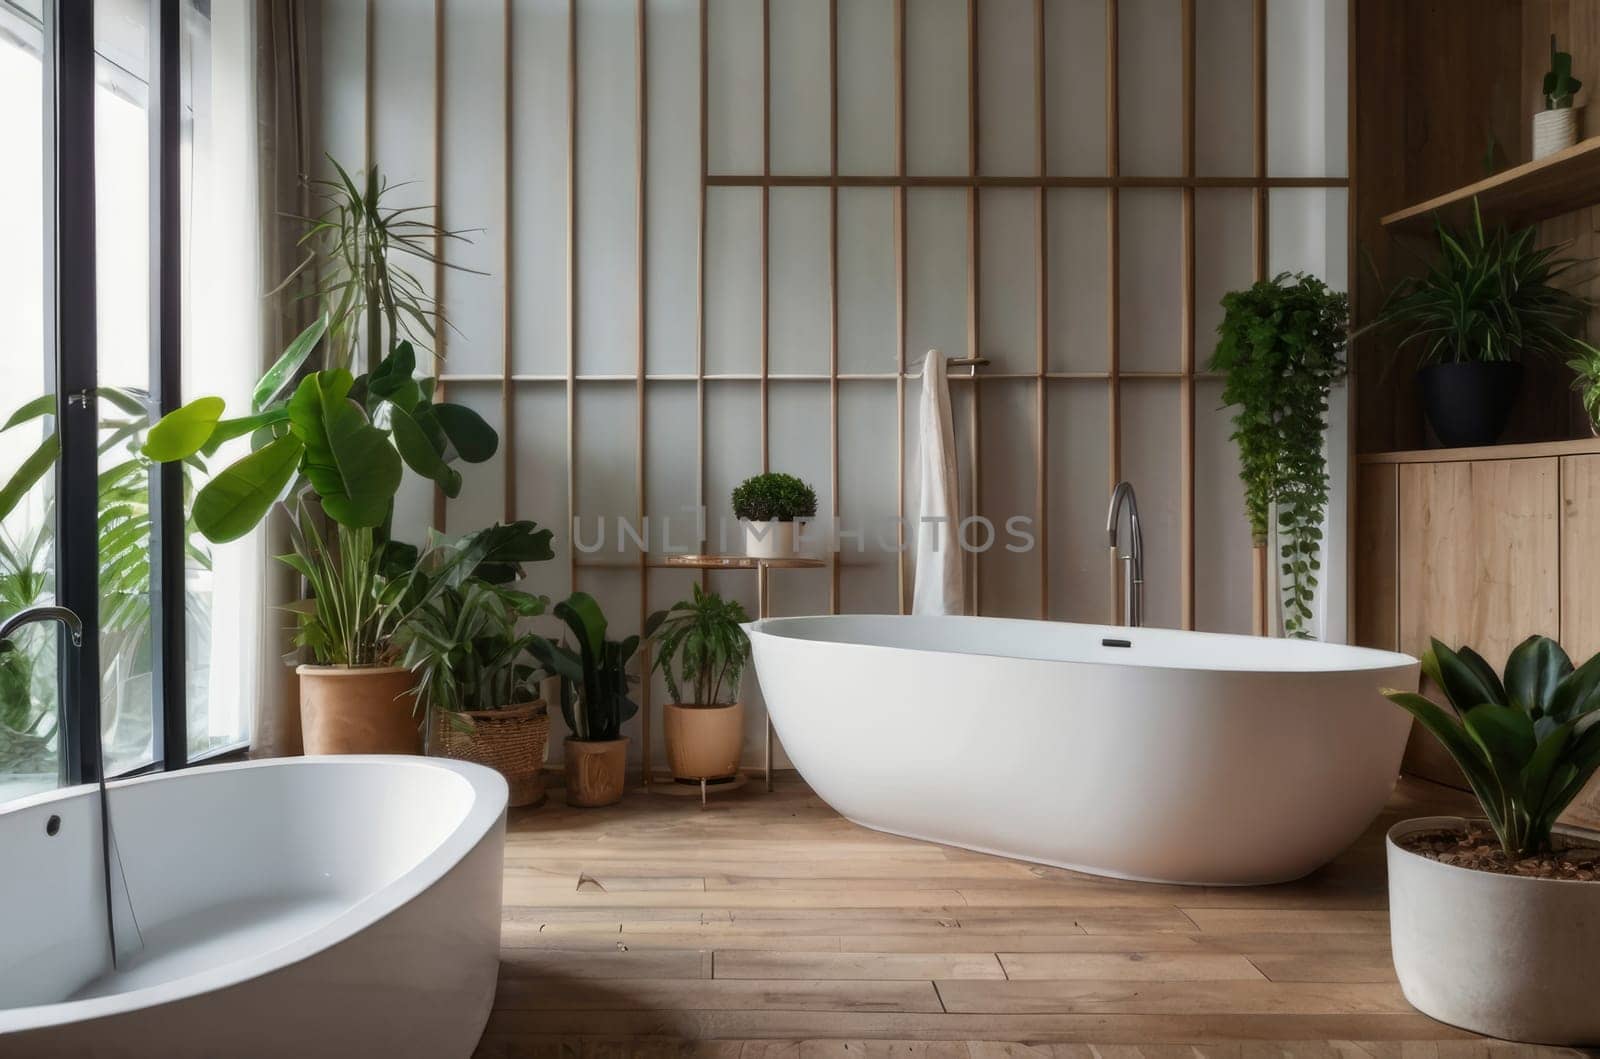 Home garden, bathroom in white and wooden tones. Close-up, bed, parquet floor and many houseplants. Urban jungle interior design. Biophilia concept.